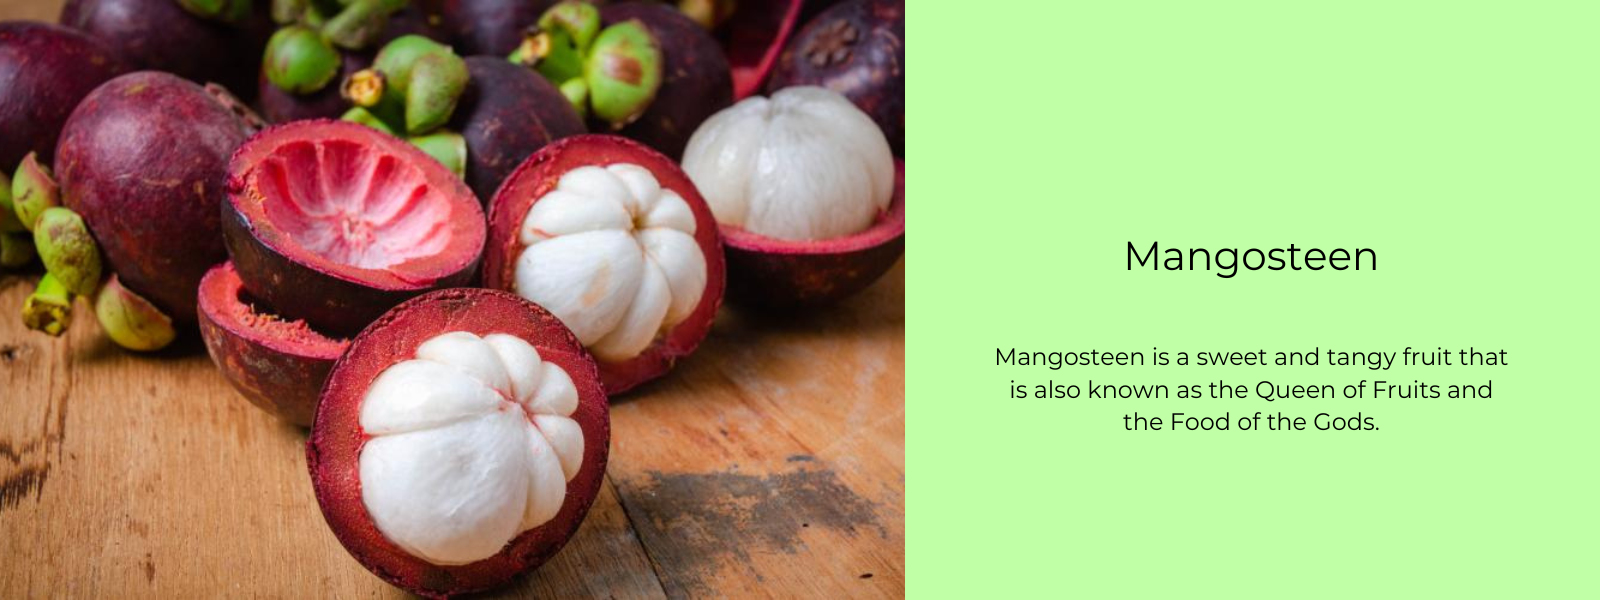 Mangosteen - Health Benefits, Uses and Important Facts